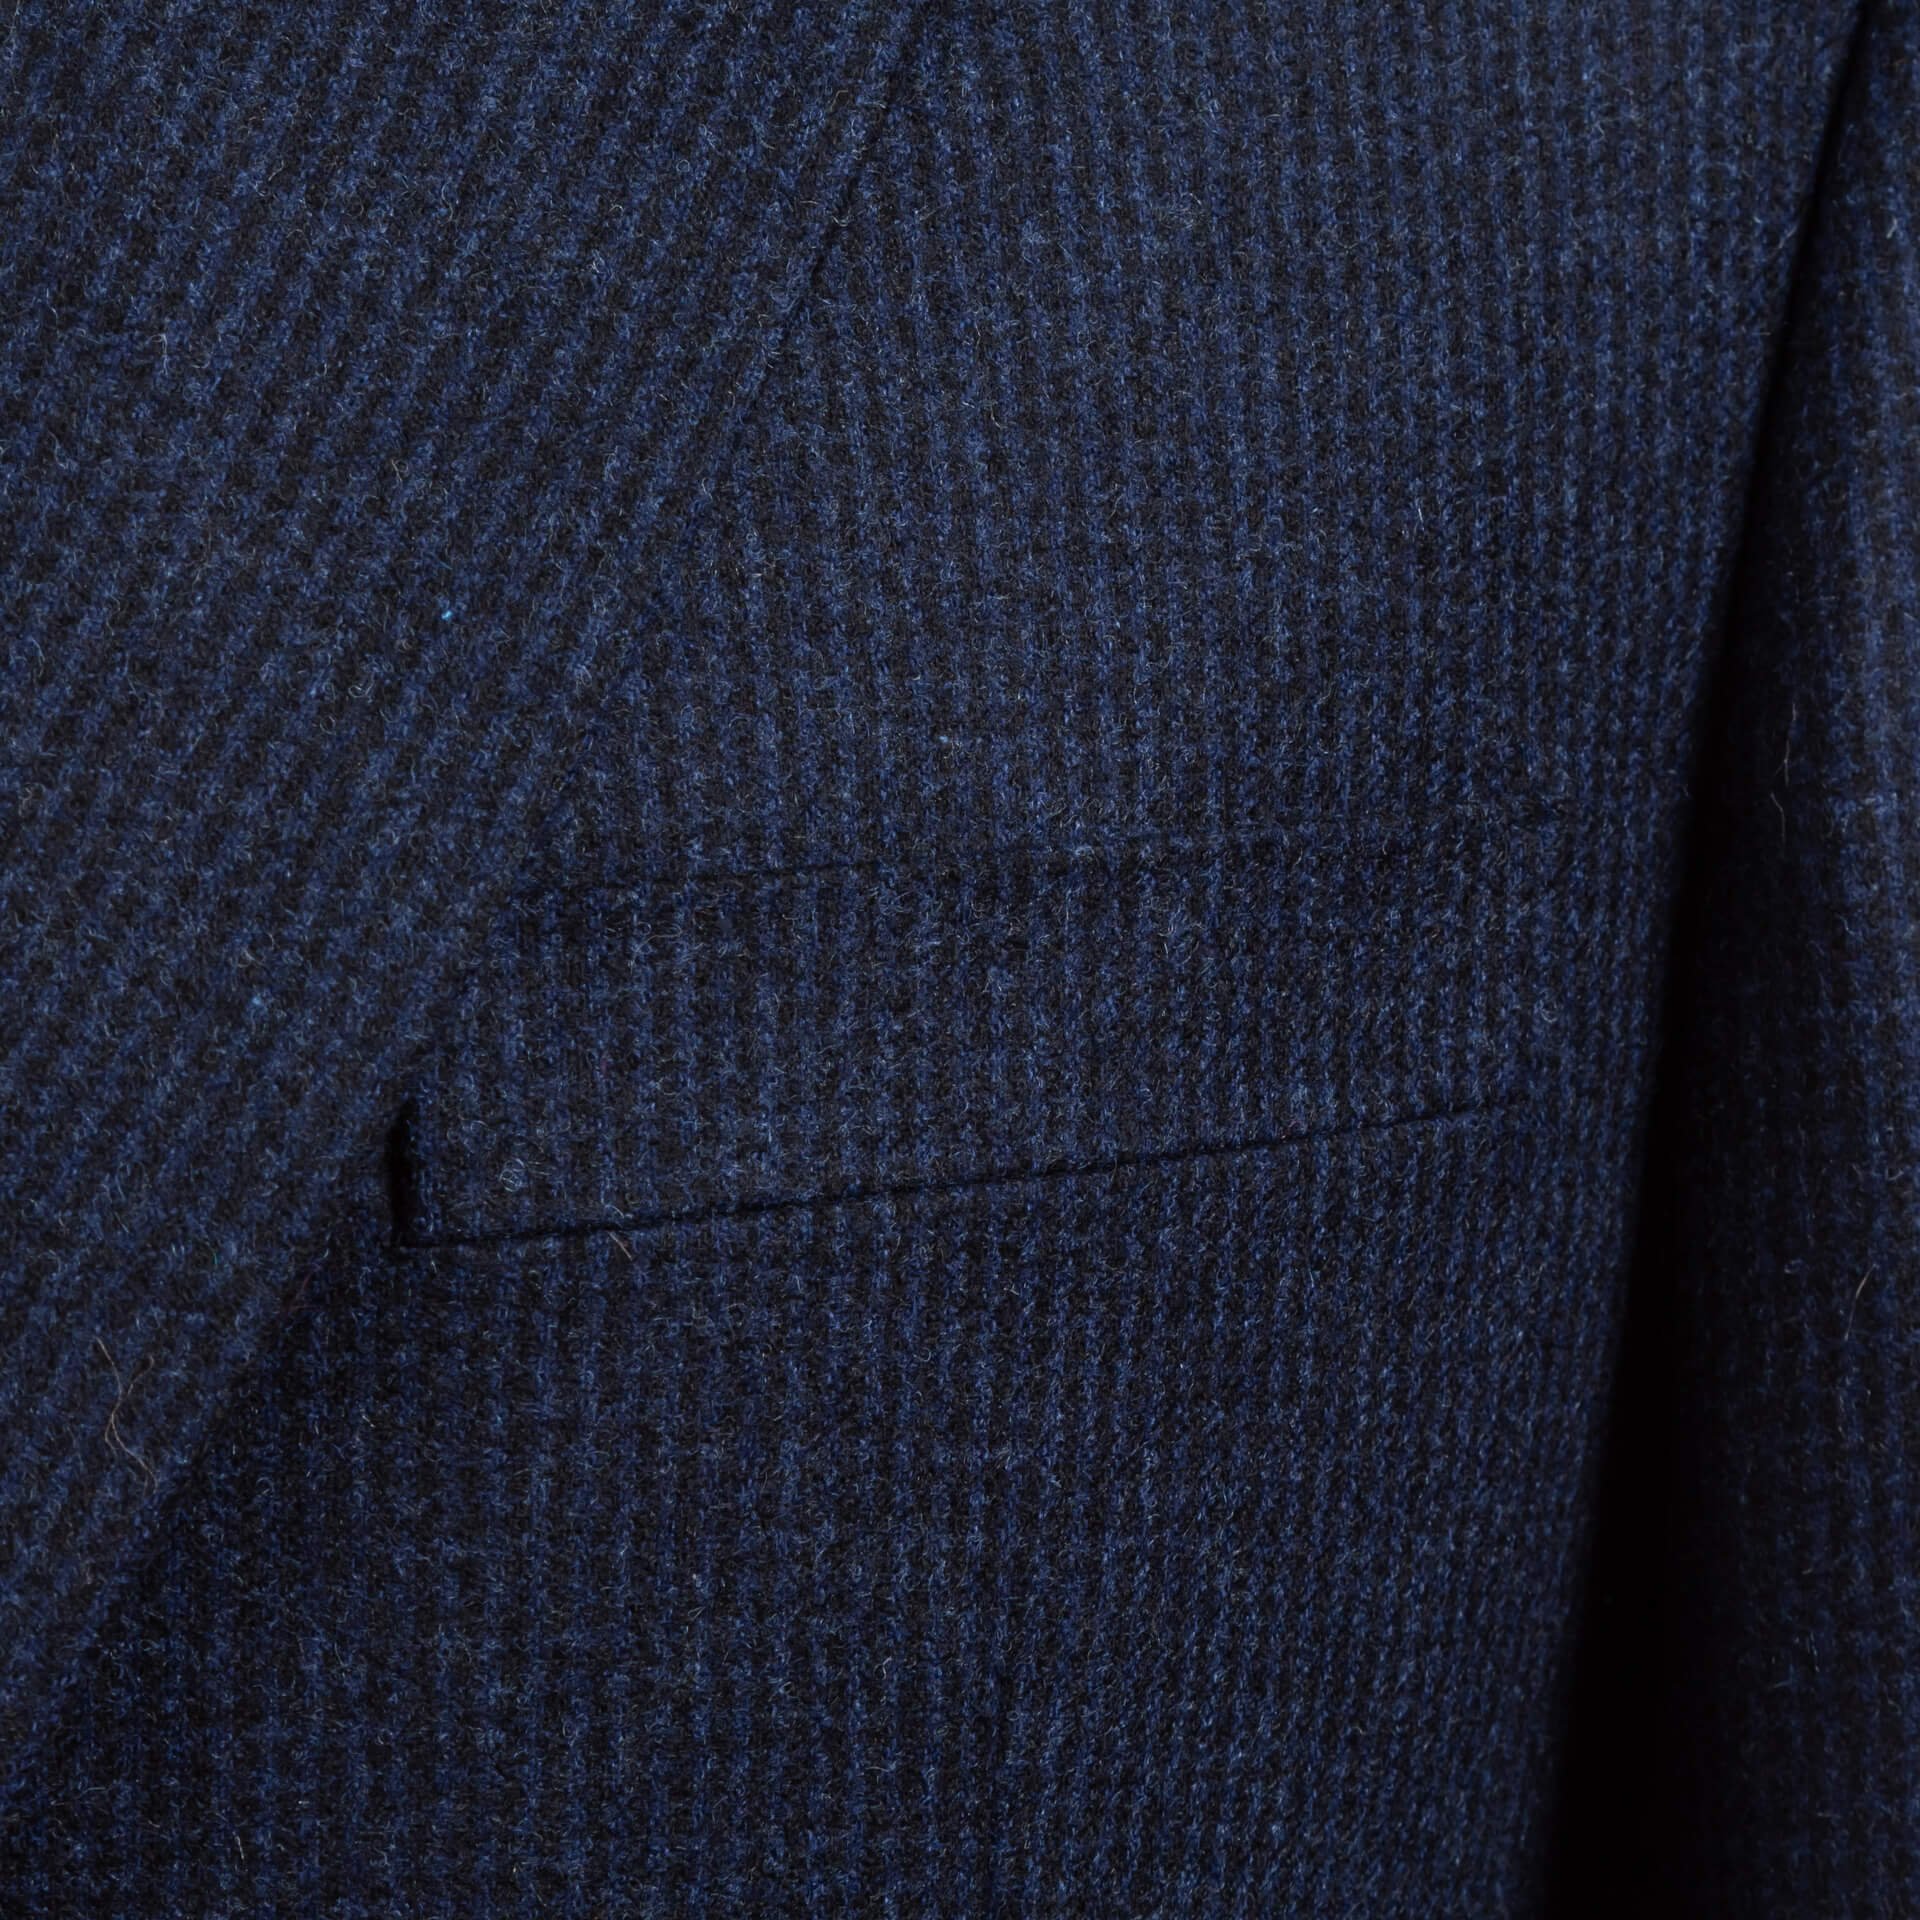 Tailor Made Suit Blue Houndstooth